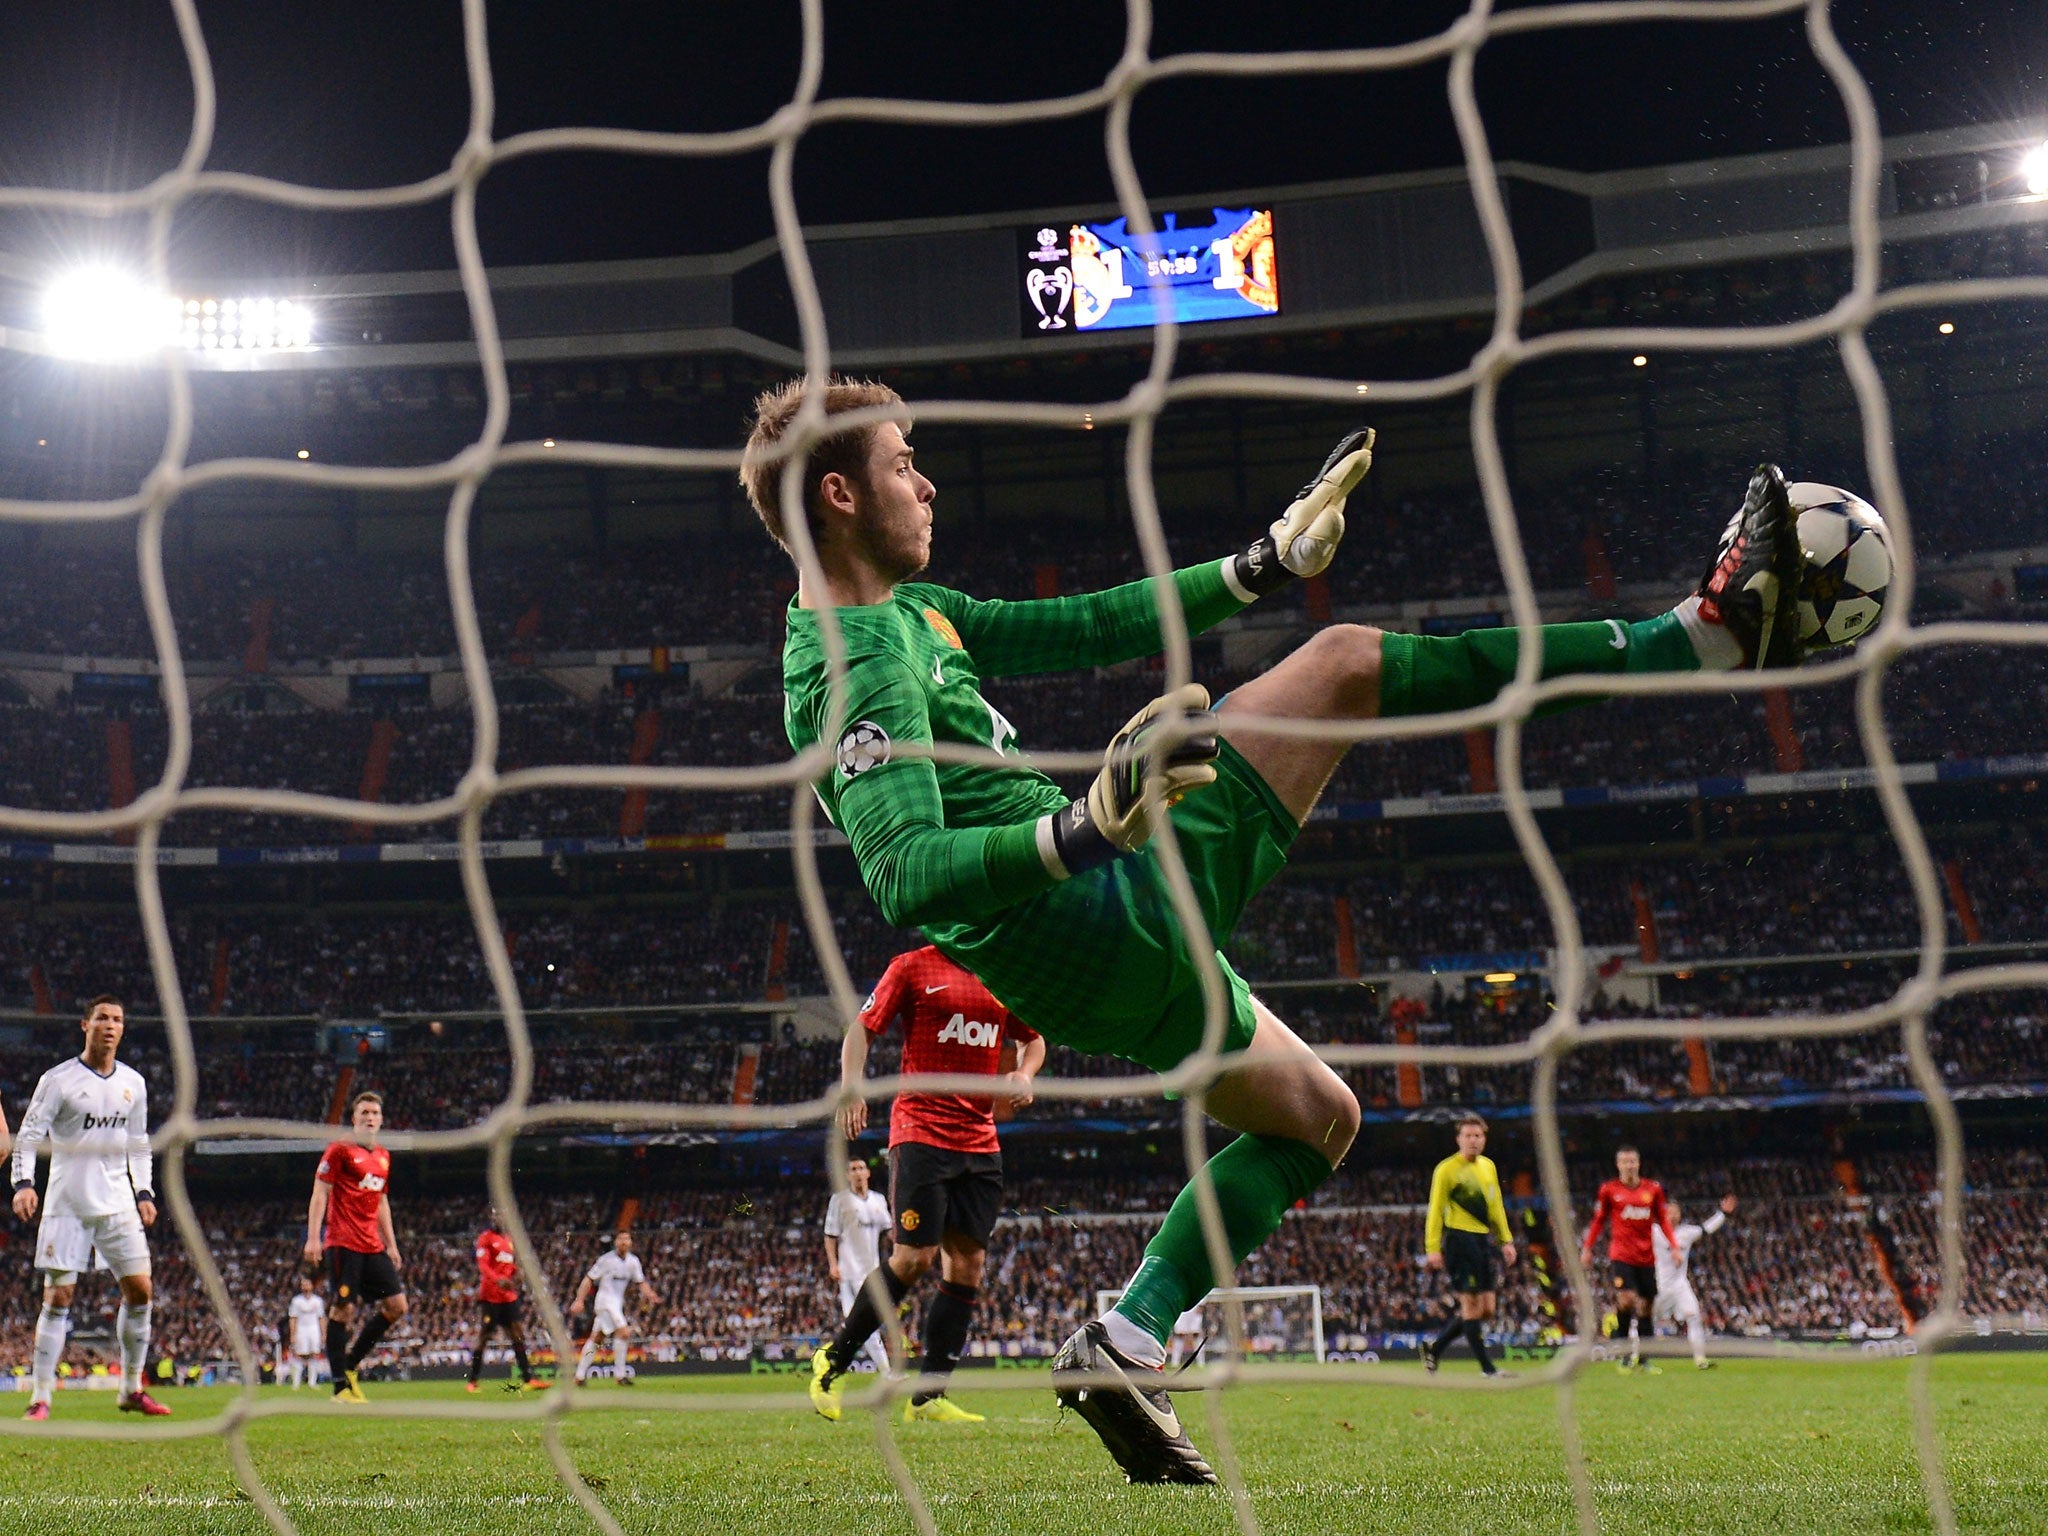 David De Gea repels a shot from Real Madrid with his foot